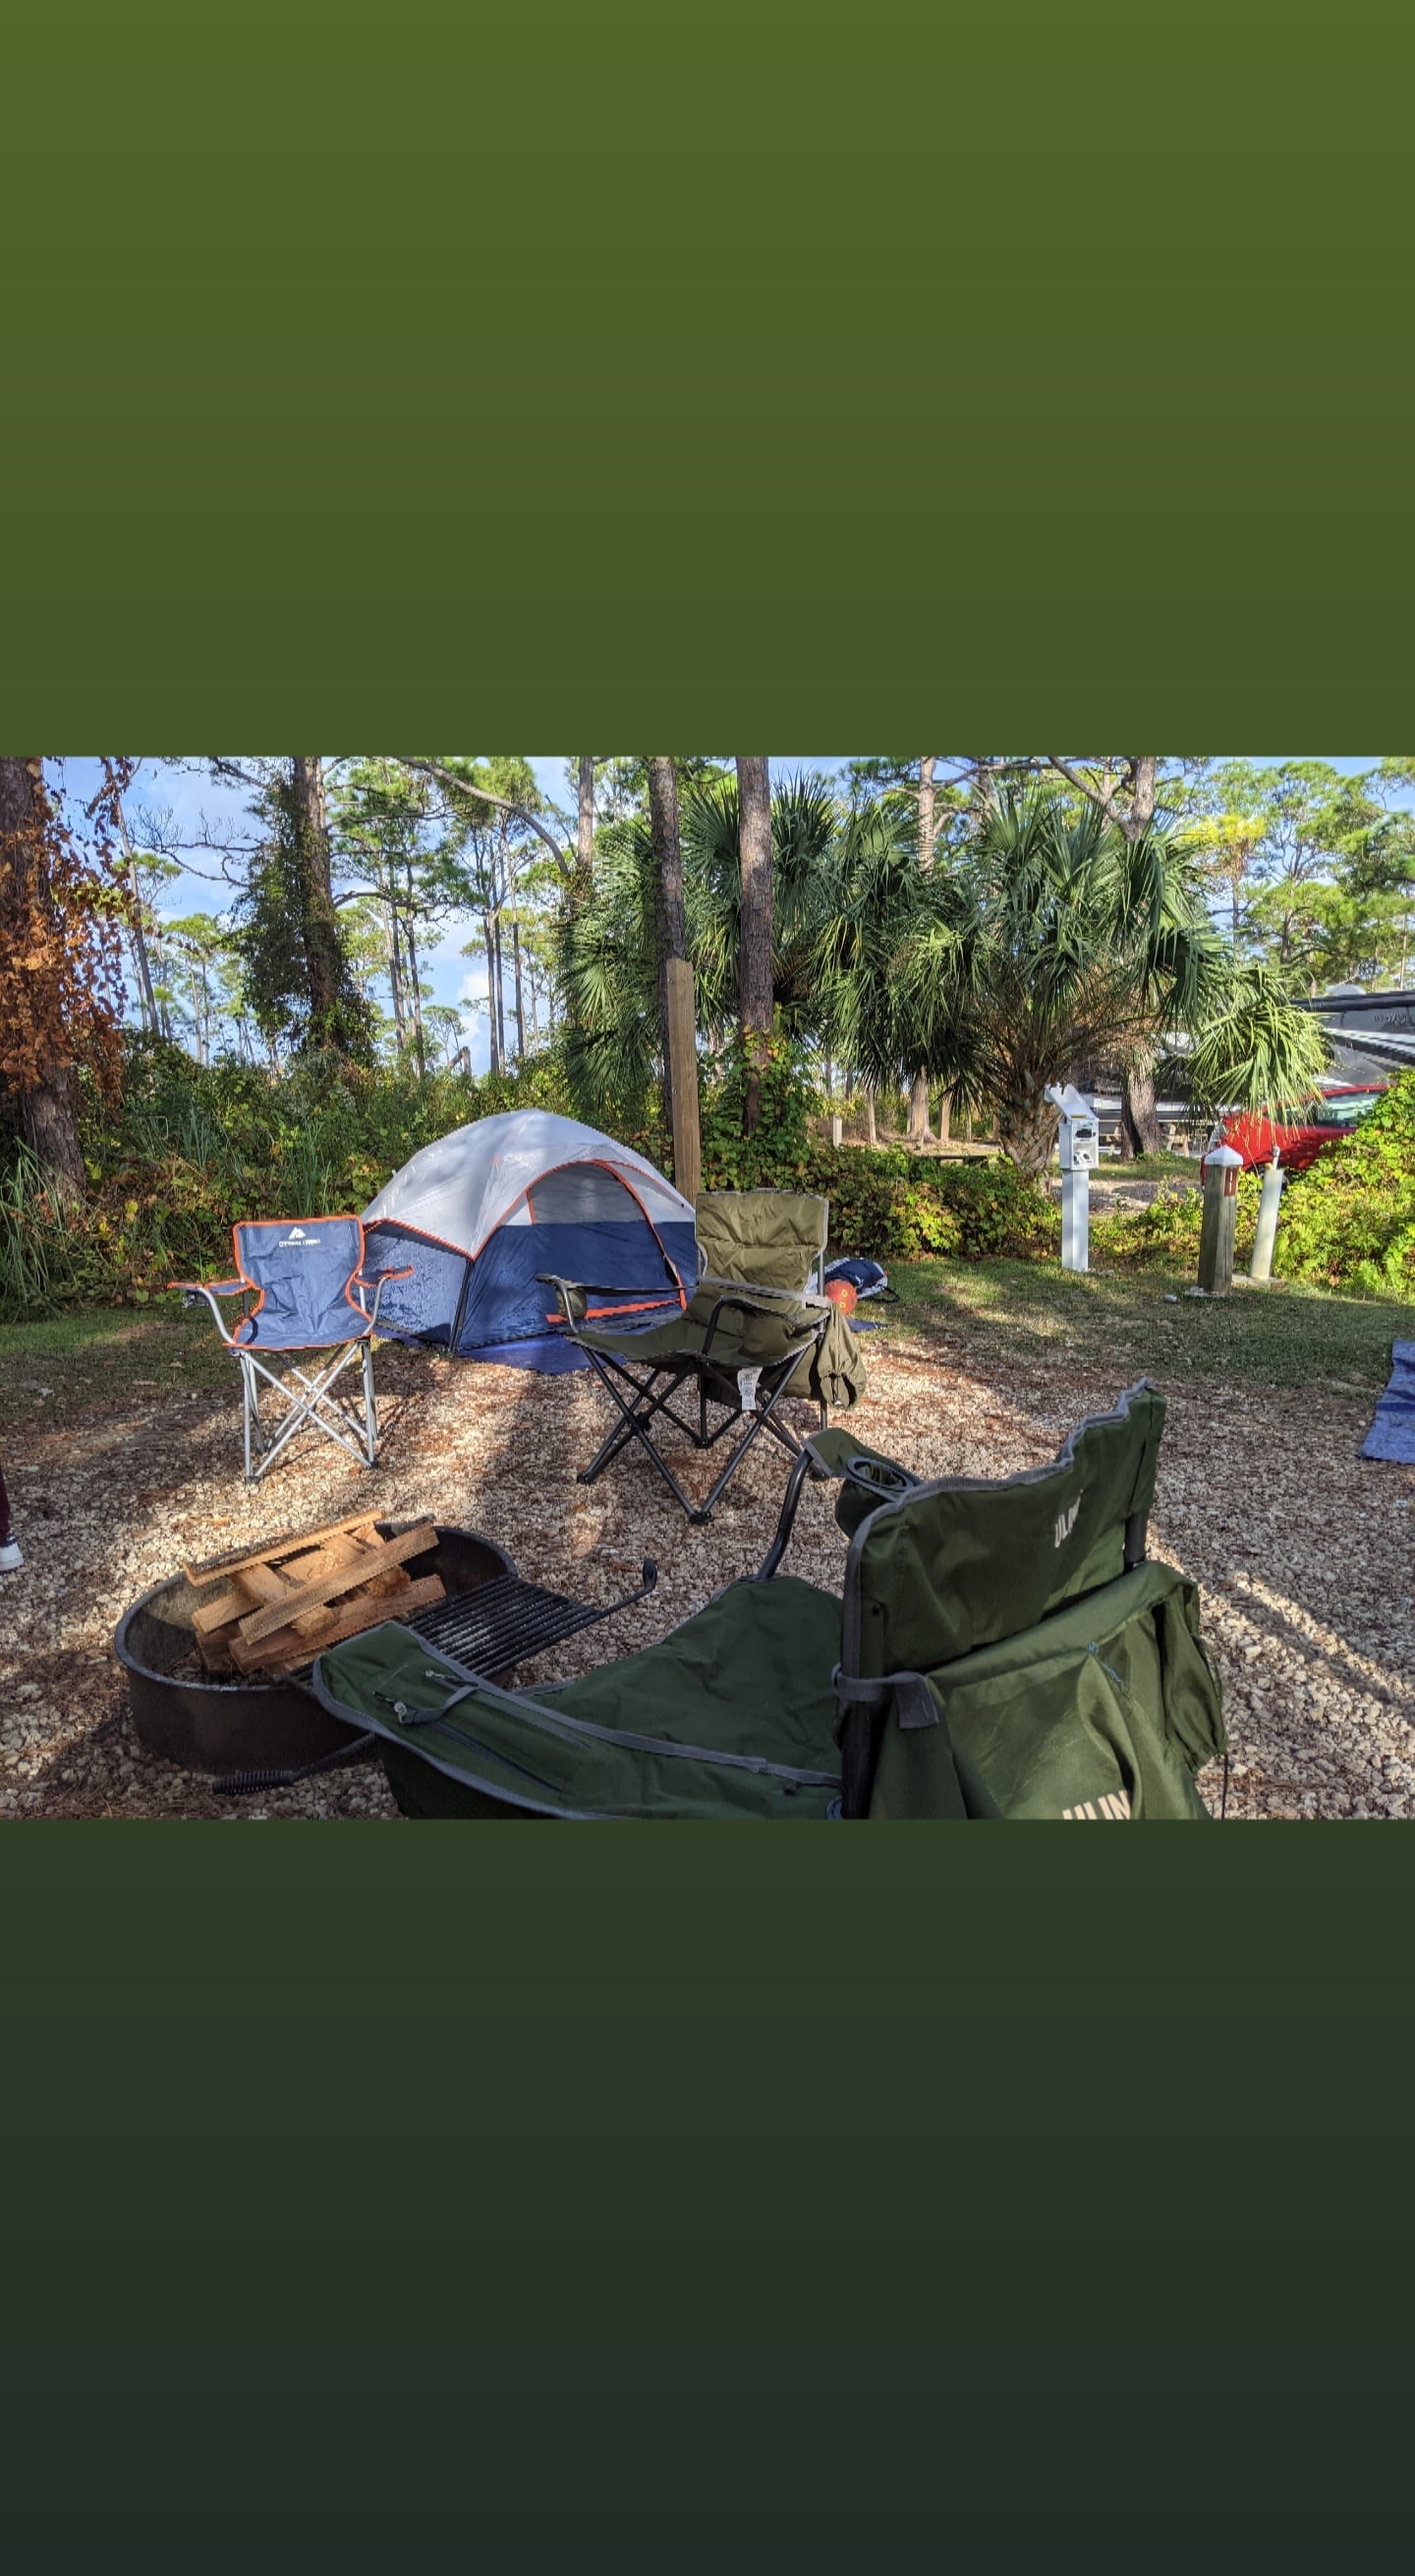 Camper submitted image from Dr. Julian G. Bruce St. George Island State Park - 1